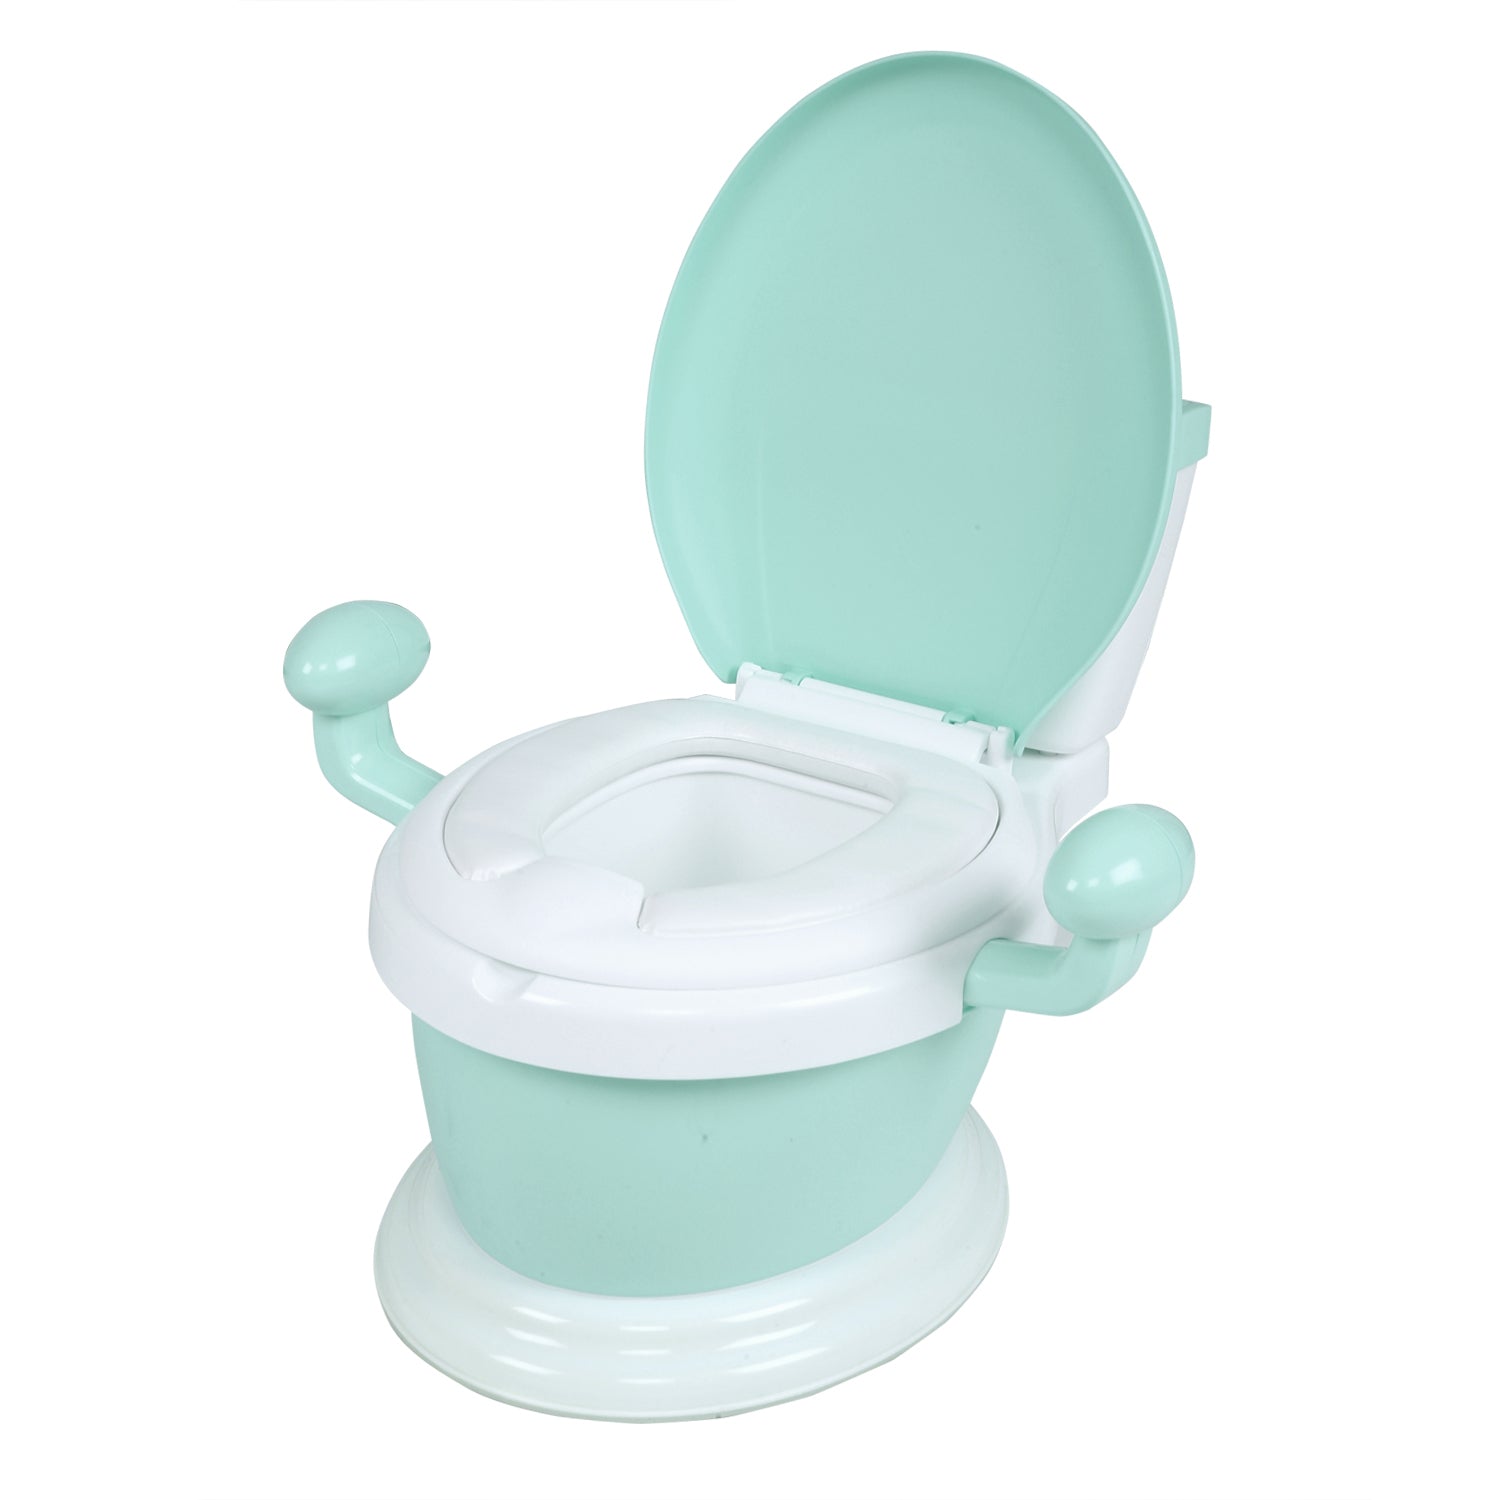 Mint Green Potty Chair with a comfortable seat, handles for support - Baby Moo